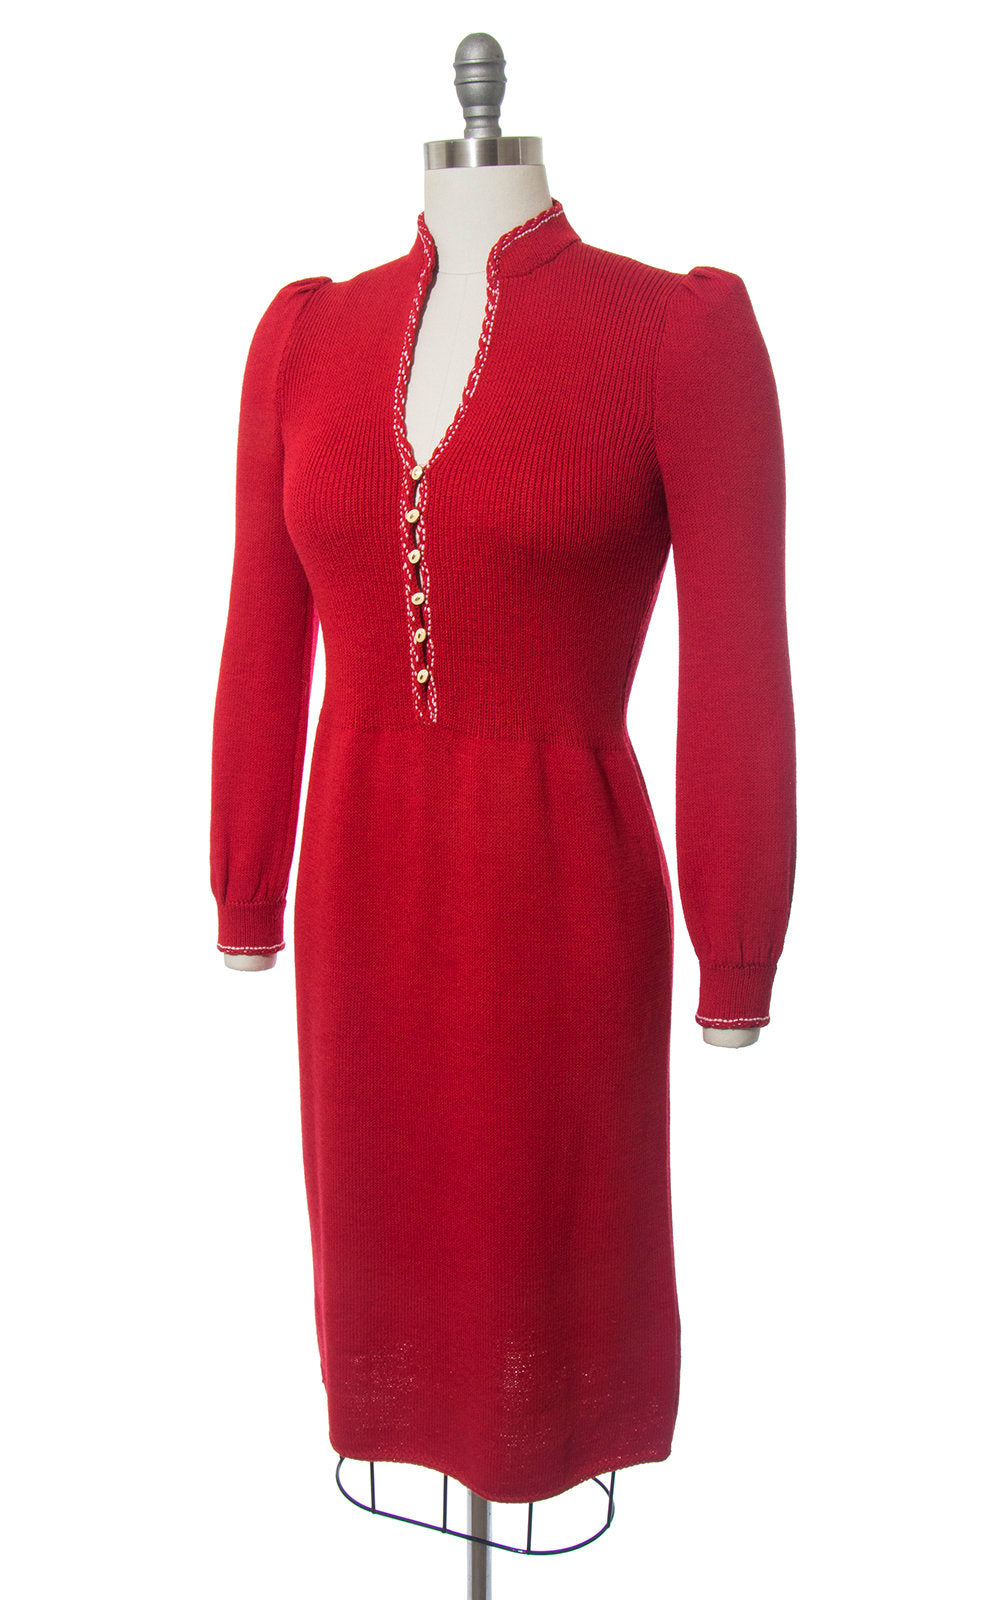 Vintage 1980s Dress | 80s ST JOHN Red Knit Button Up Long Puff Sleeve Day Dress (small/medium)